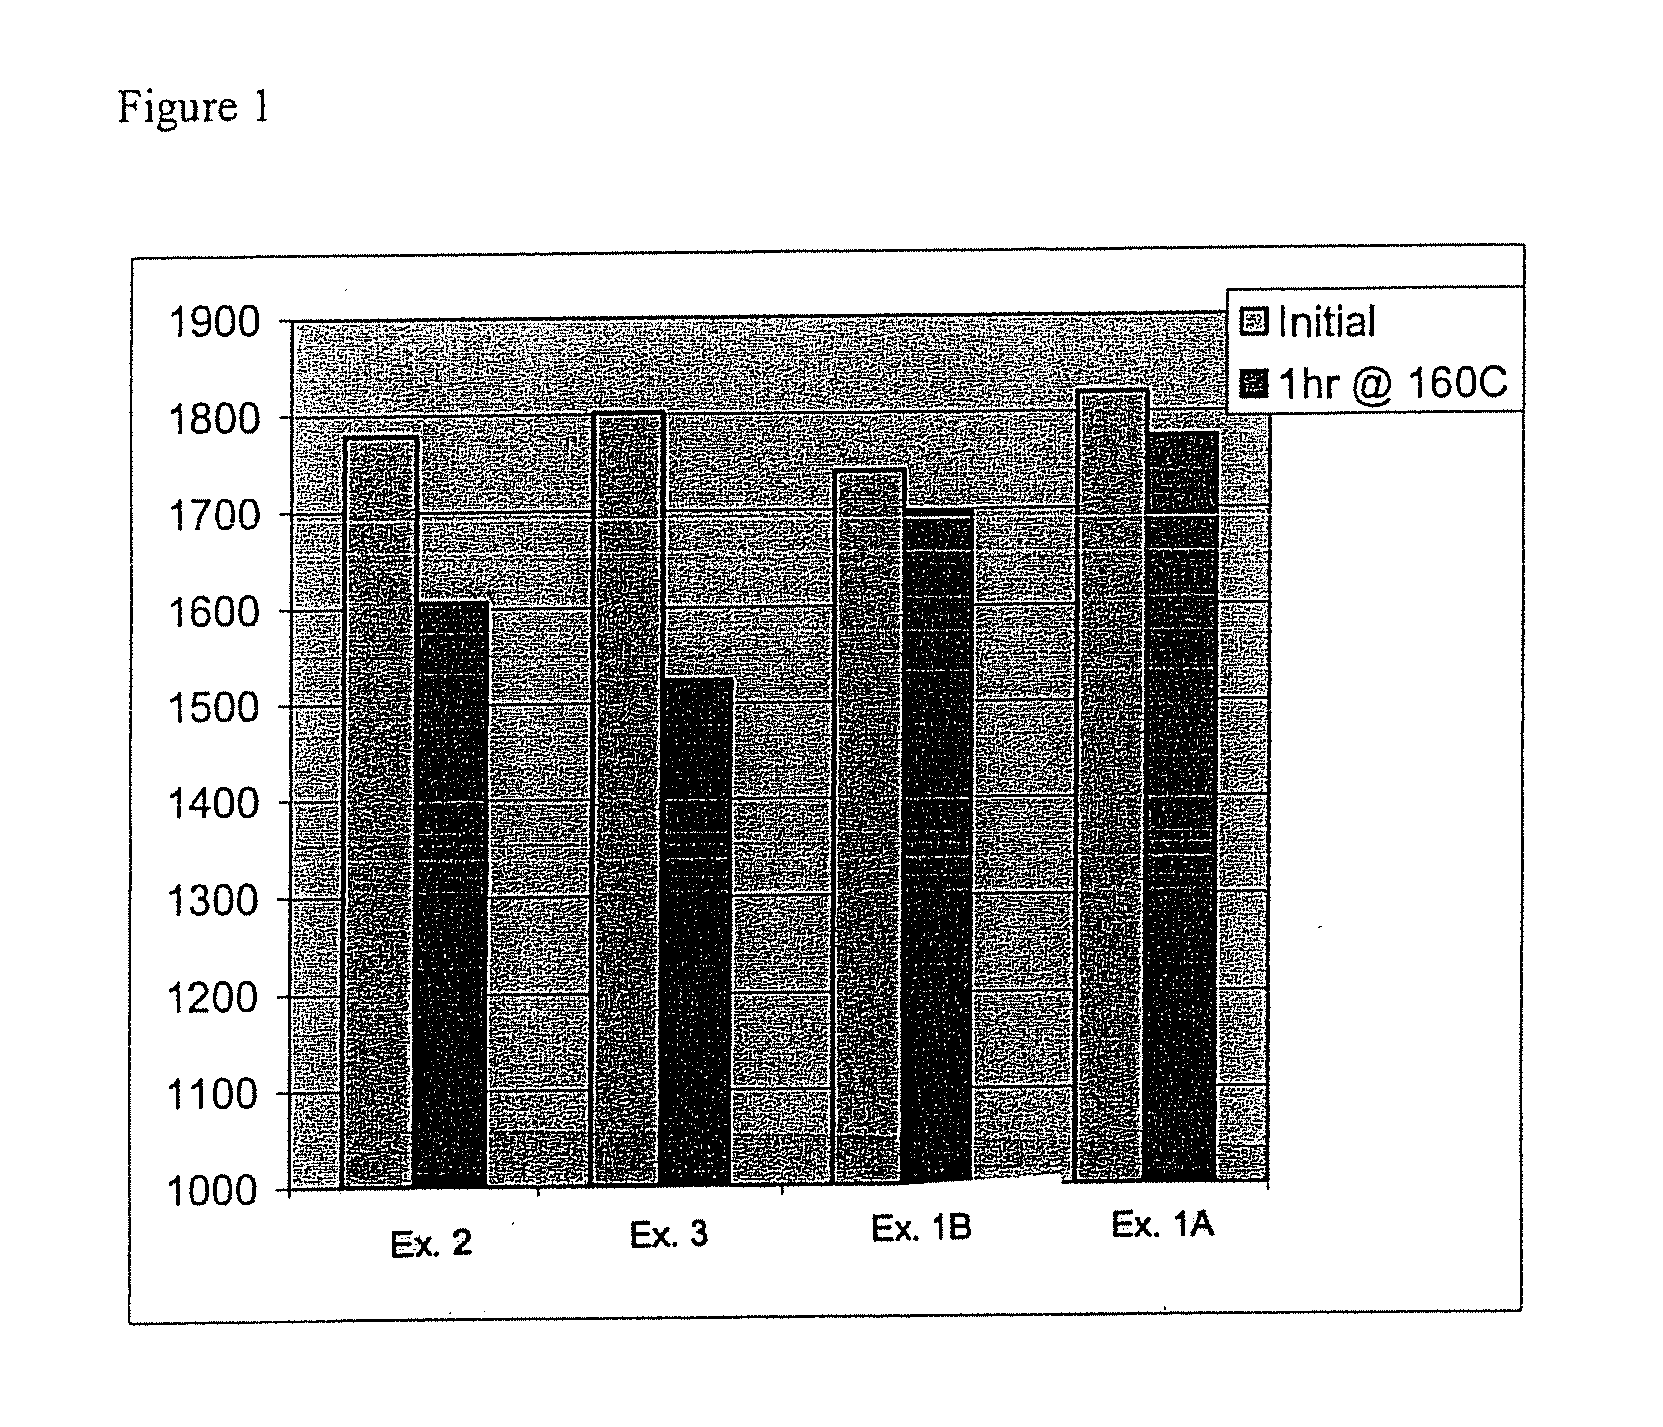 Polyester compositions, methods of manufacture, and uses thereof